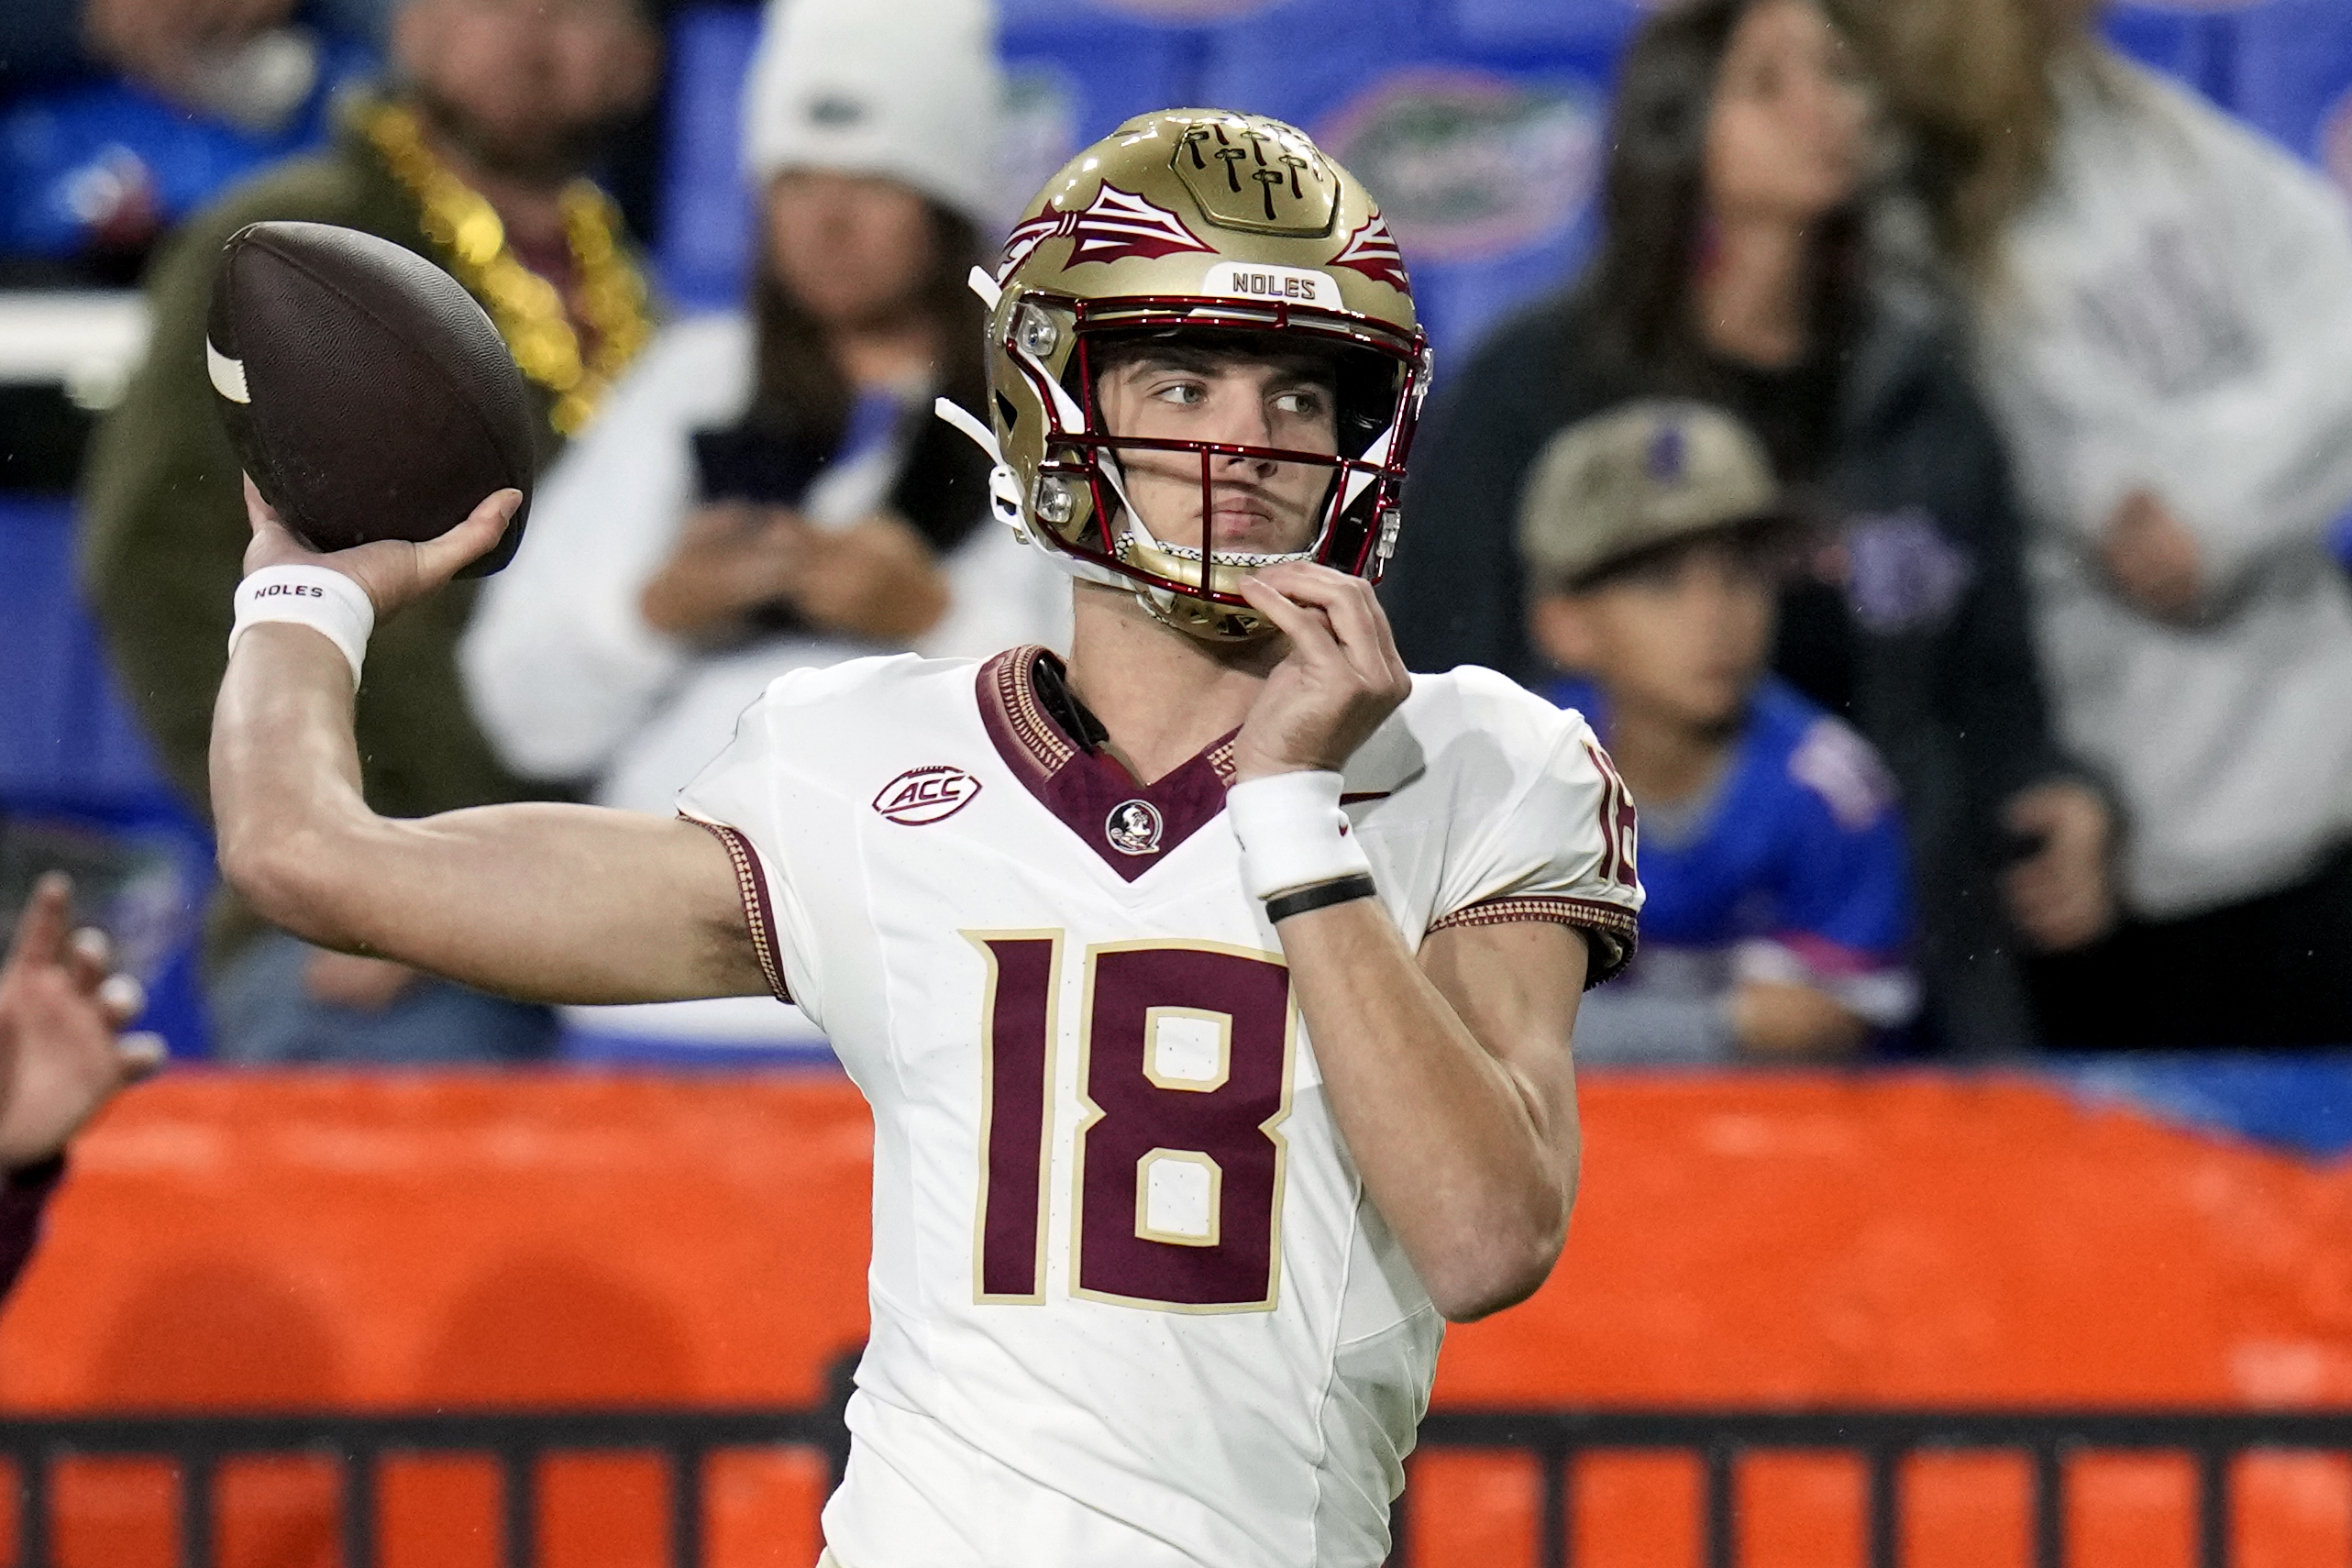 Seminoles ranked No. 4 in penultimate College Football Playoff poll